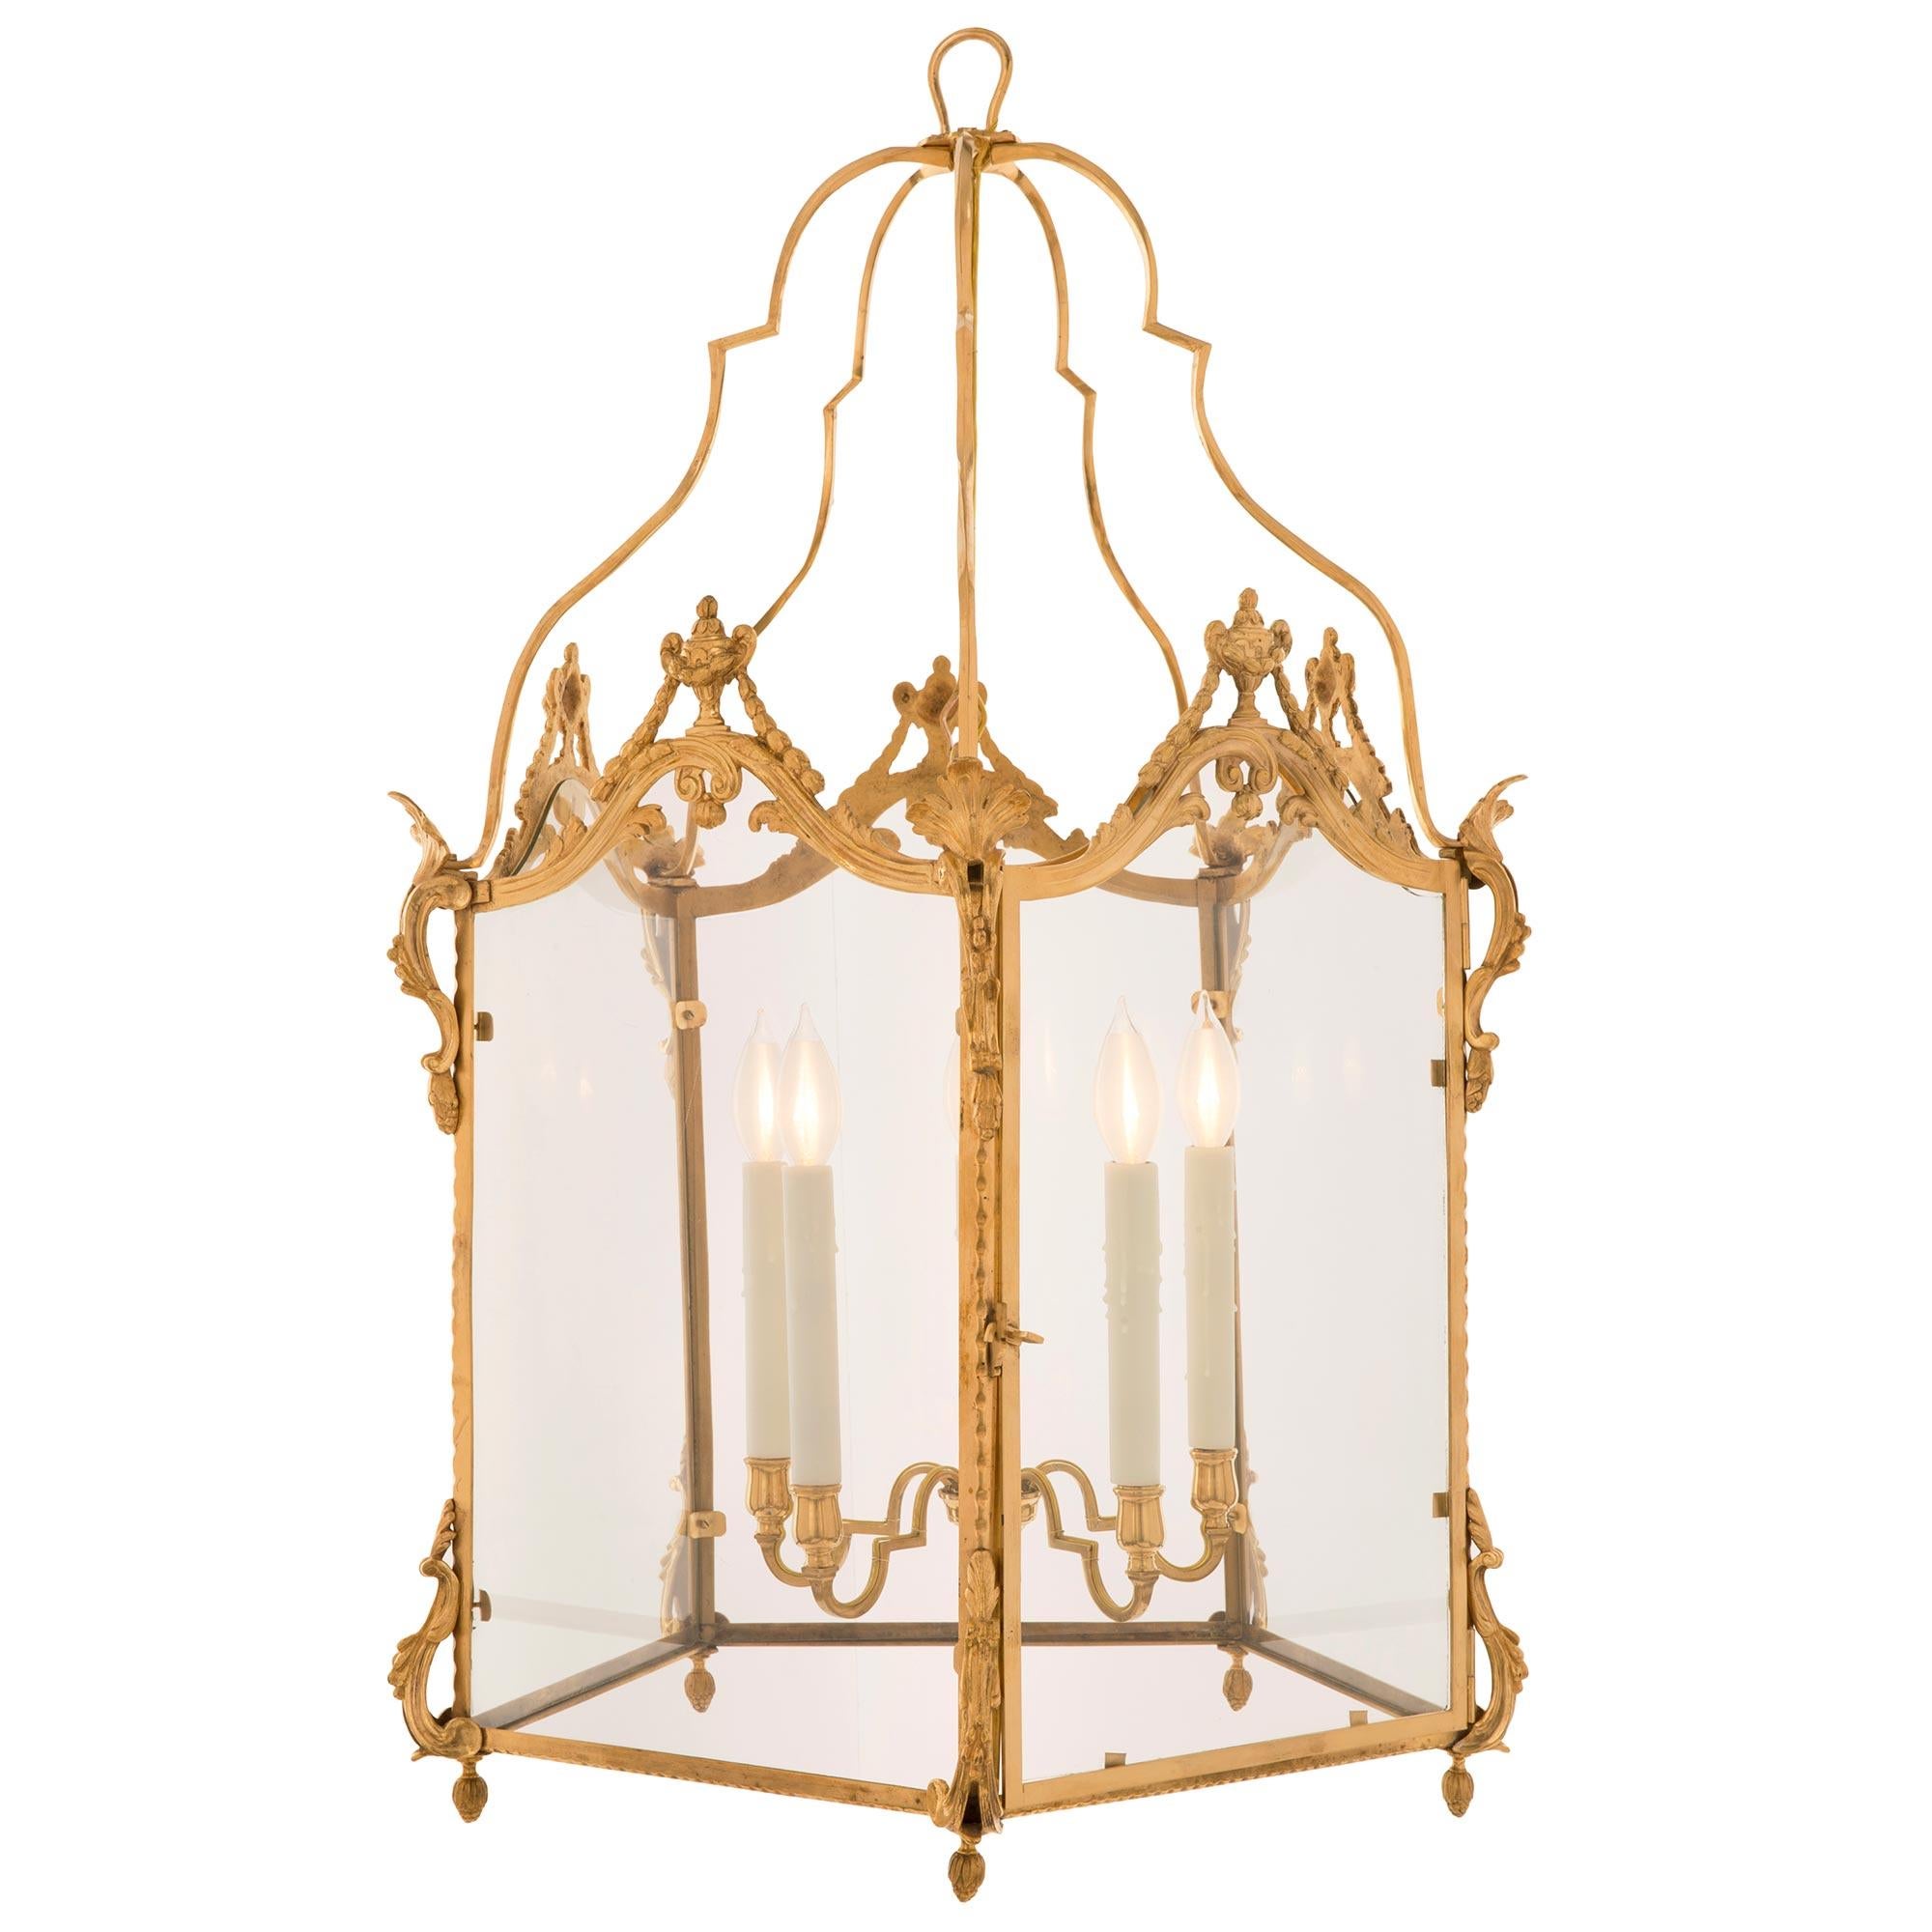 A remarkable French 19th century Louis XVI st. ormolu and glass lantern. The pentagonal shaped five light lantern displays charming richly chased bottom inverted acorn finials below lovely pierced scrolled foliate elements and a finely detailed band